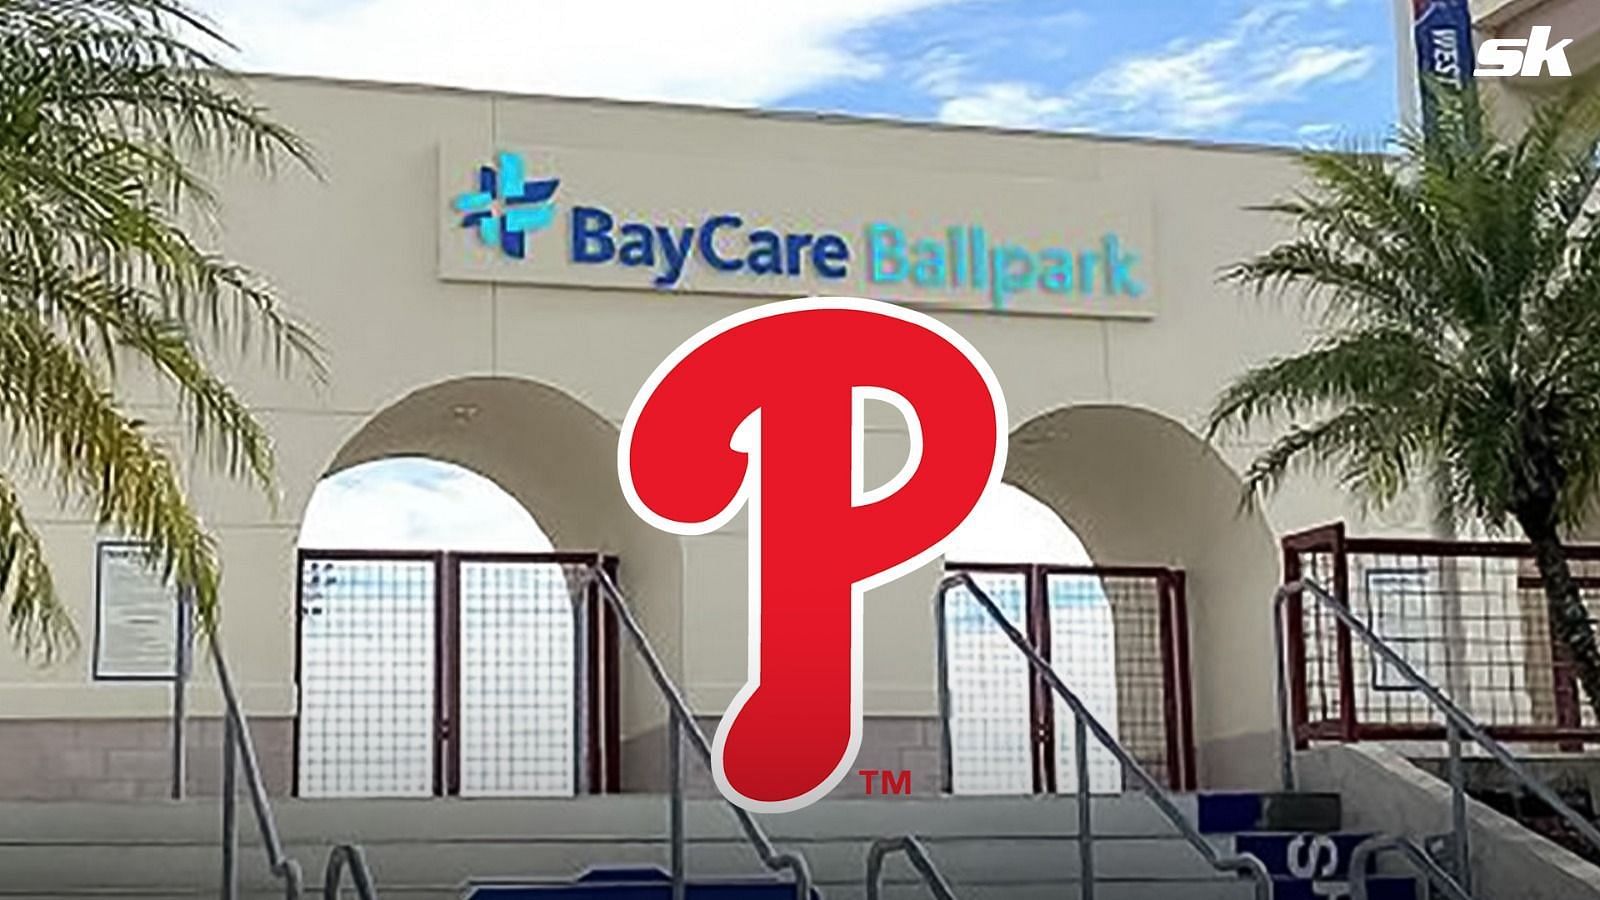 BayCare Ballpark is the official spring training home of the Philadelphia Phillies